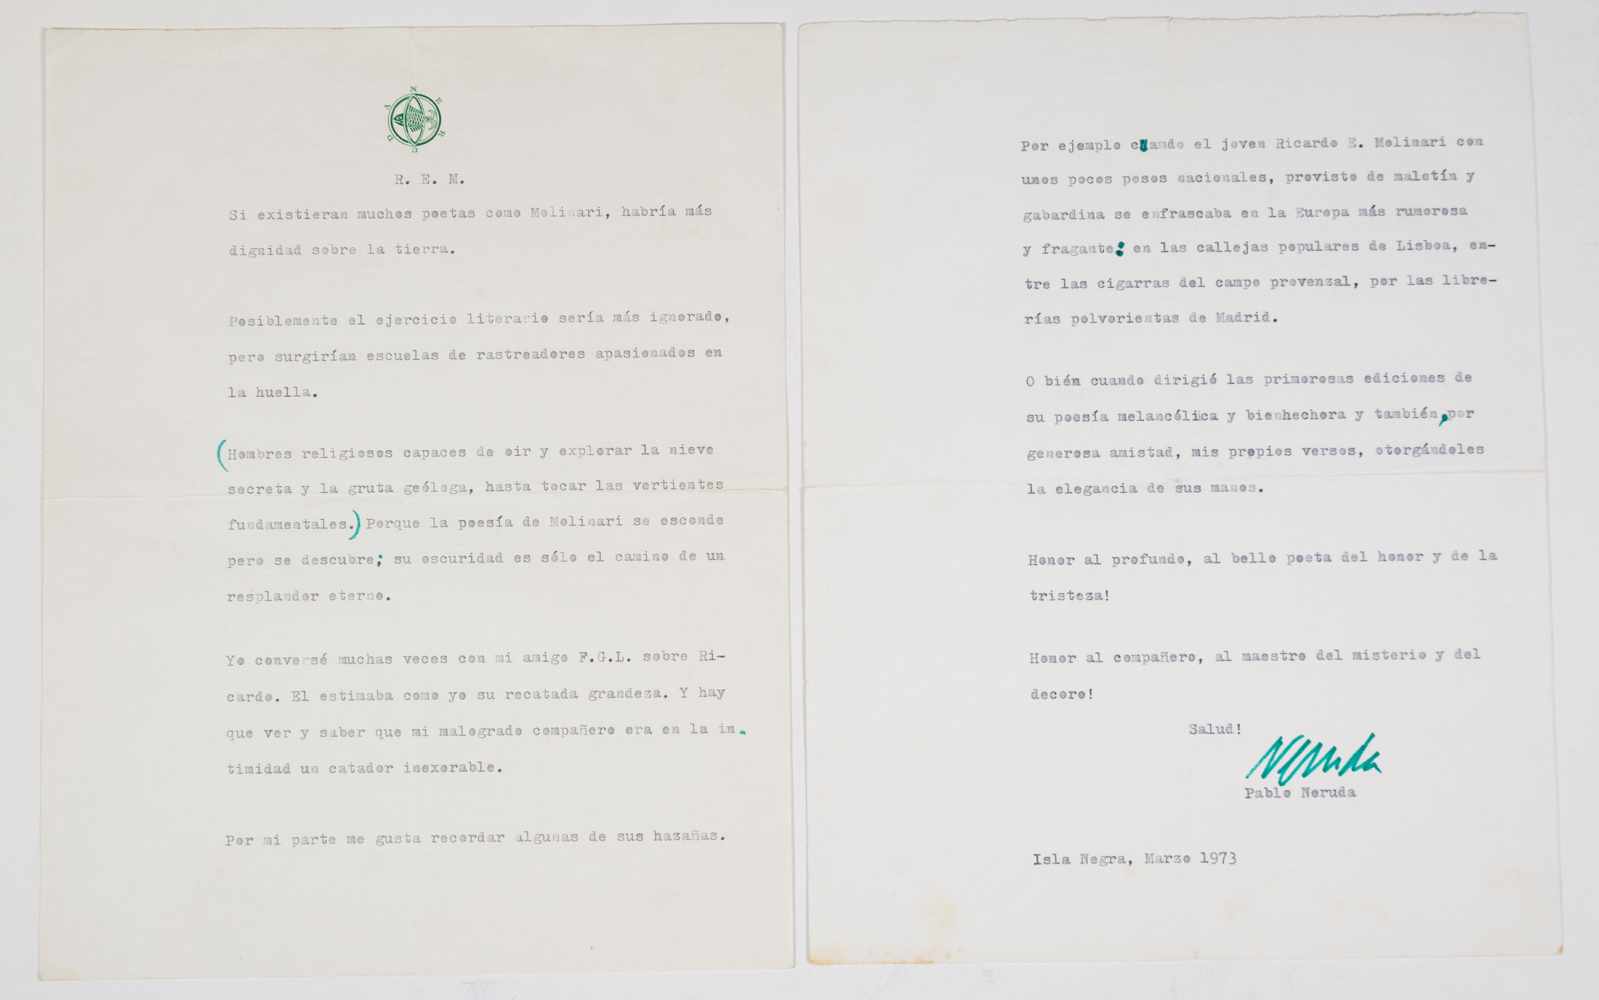 Original text by Pablo Neruda. The subject is Ricardo E. Molinari. Isla Negra, March 1973. Two pages